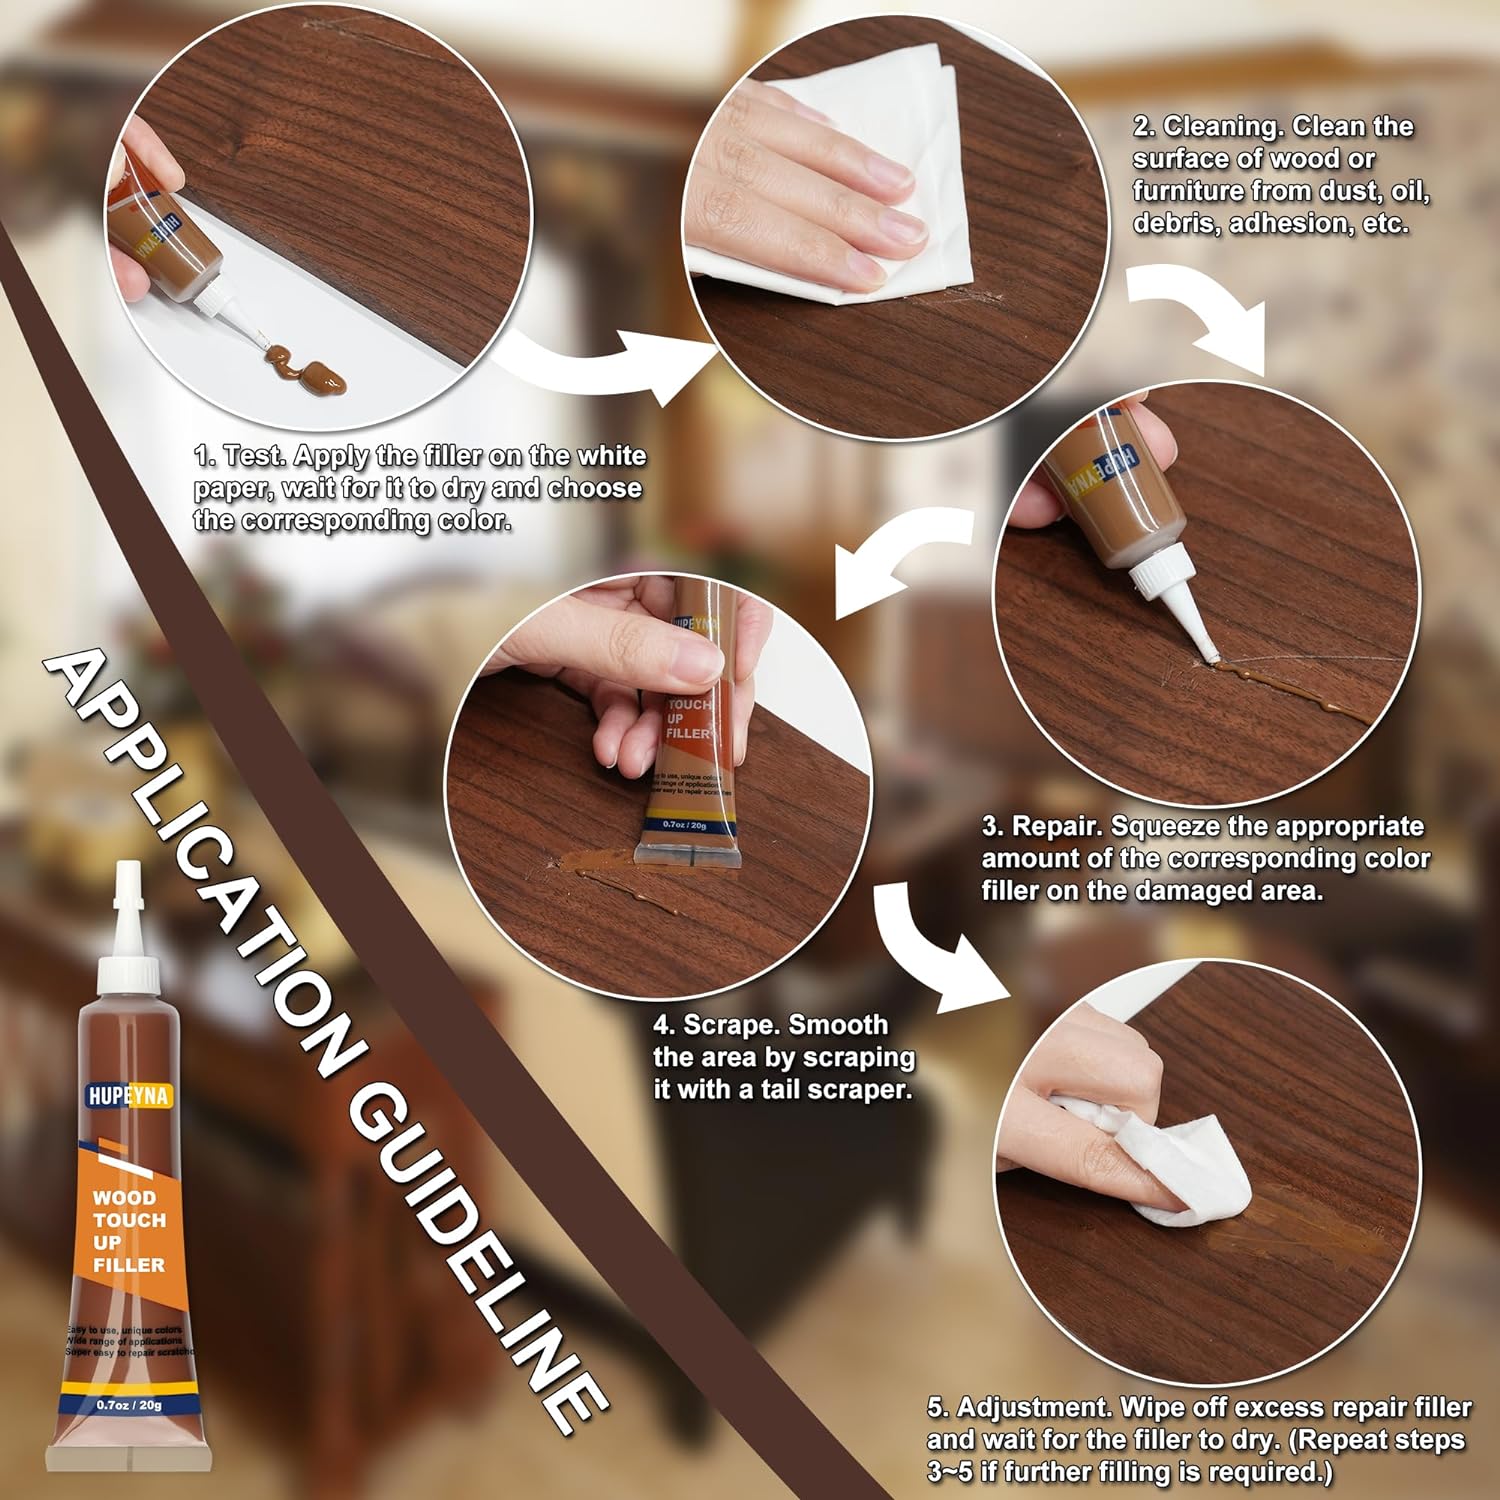 Hupeyna Wood Furniture Repair Kit, 12 Colors Wood Repair Kit, Wood Touch up Fillers, Repair Scratch, Cracks, Discoloration for Wooden Cabinet, Floor, Door, Table Surfaces Wood Filler Paint : Health & Household